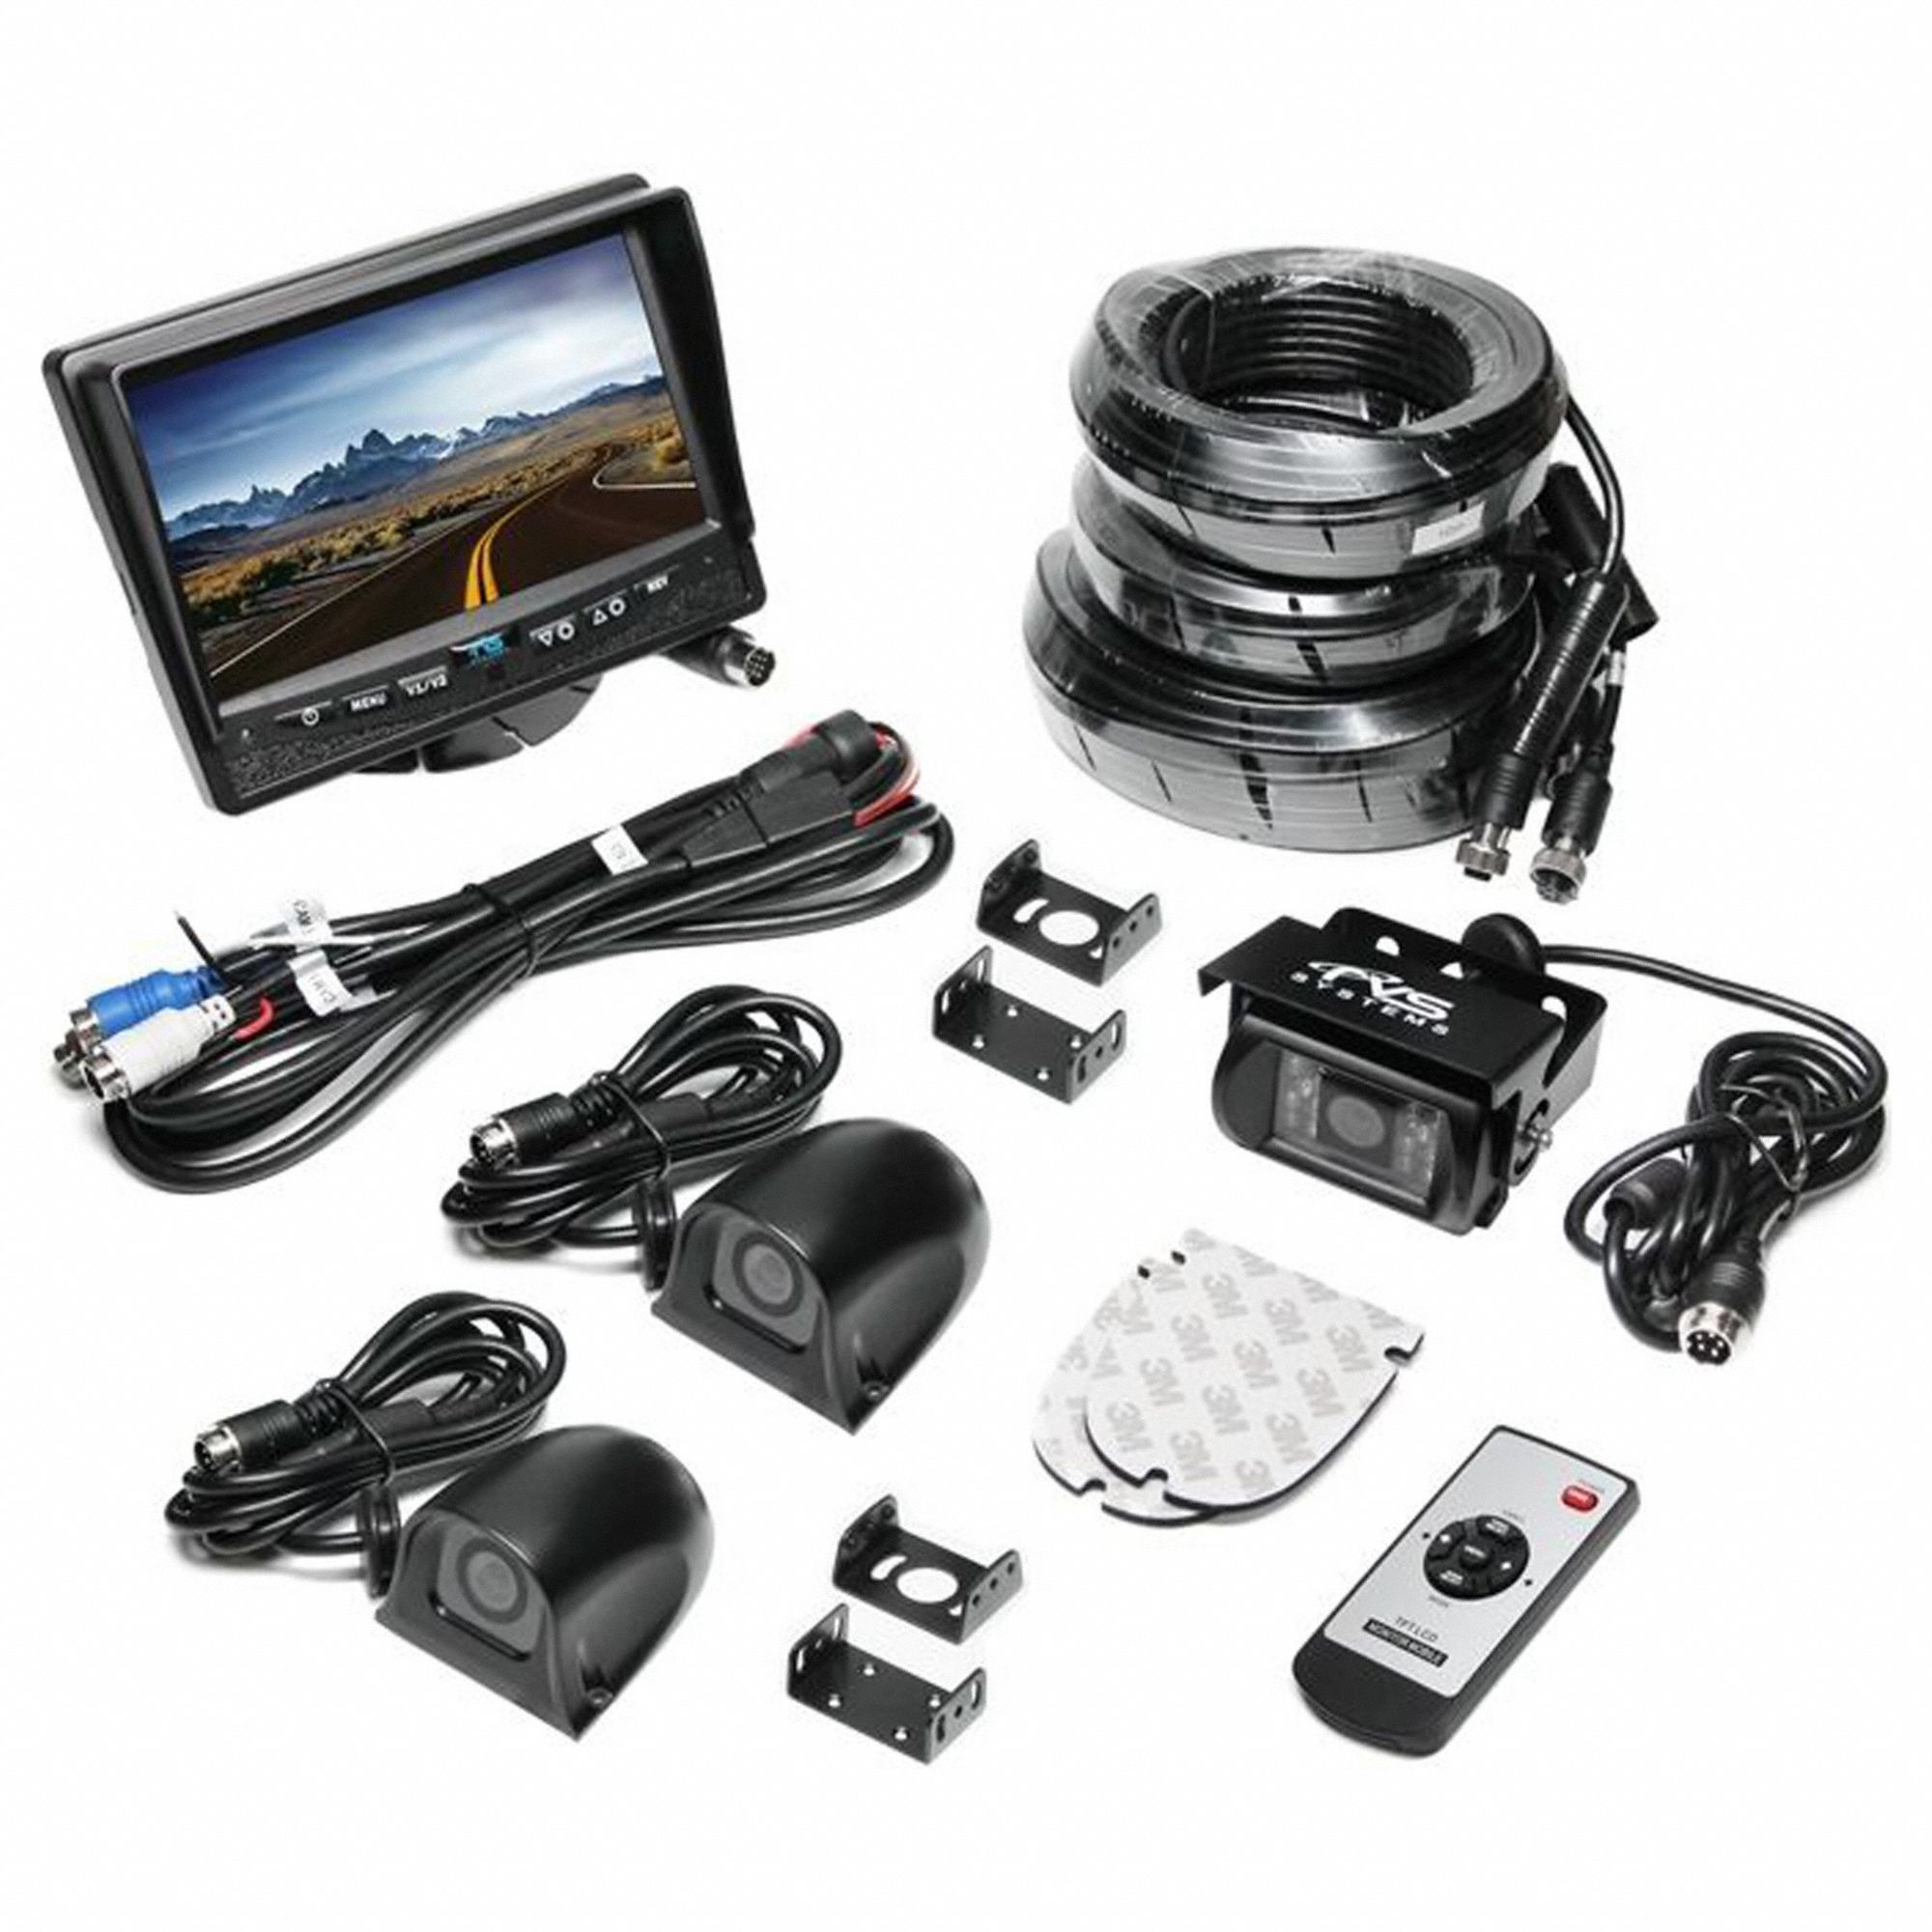 Rear View Camera System: CCD, TFT-LCD, 120°_130° Viewing Angle